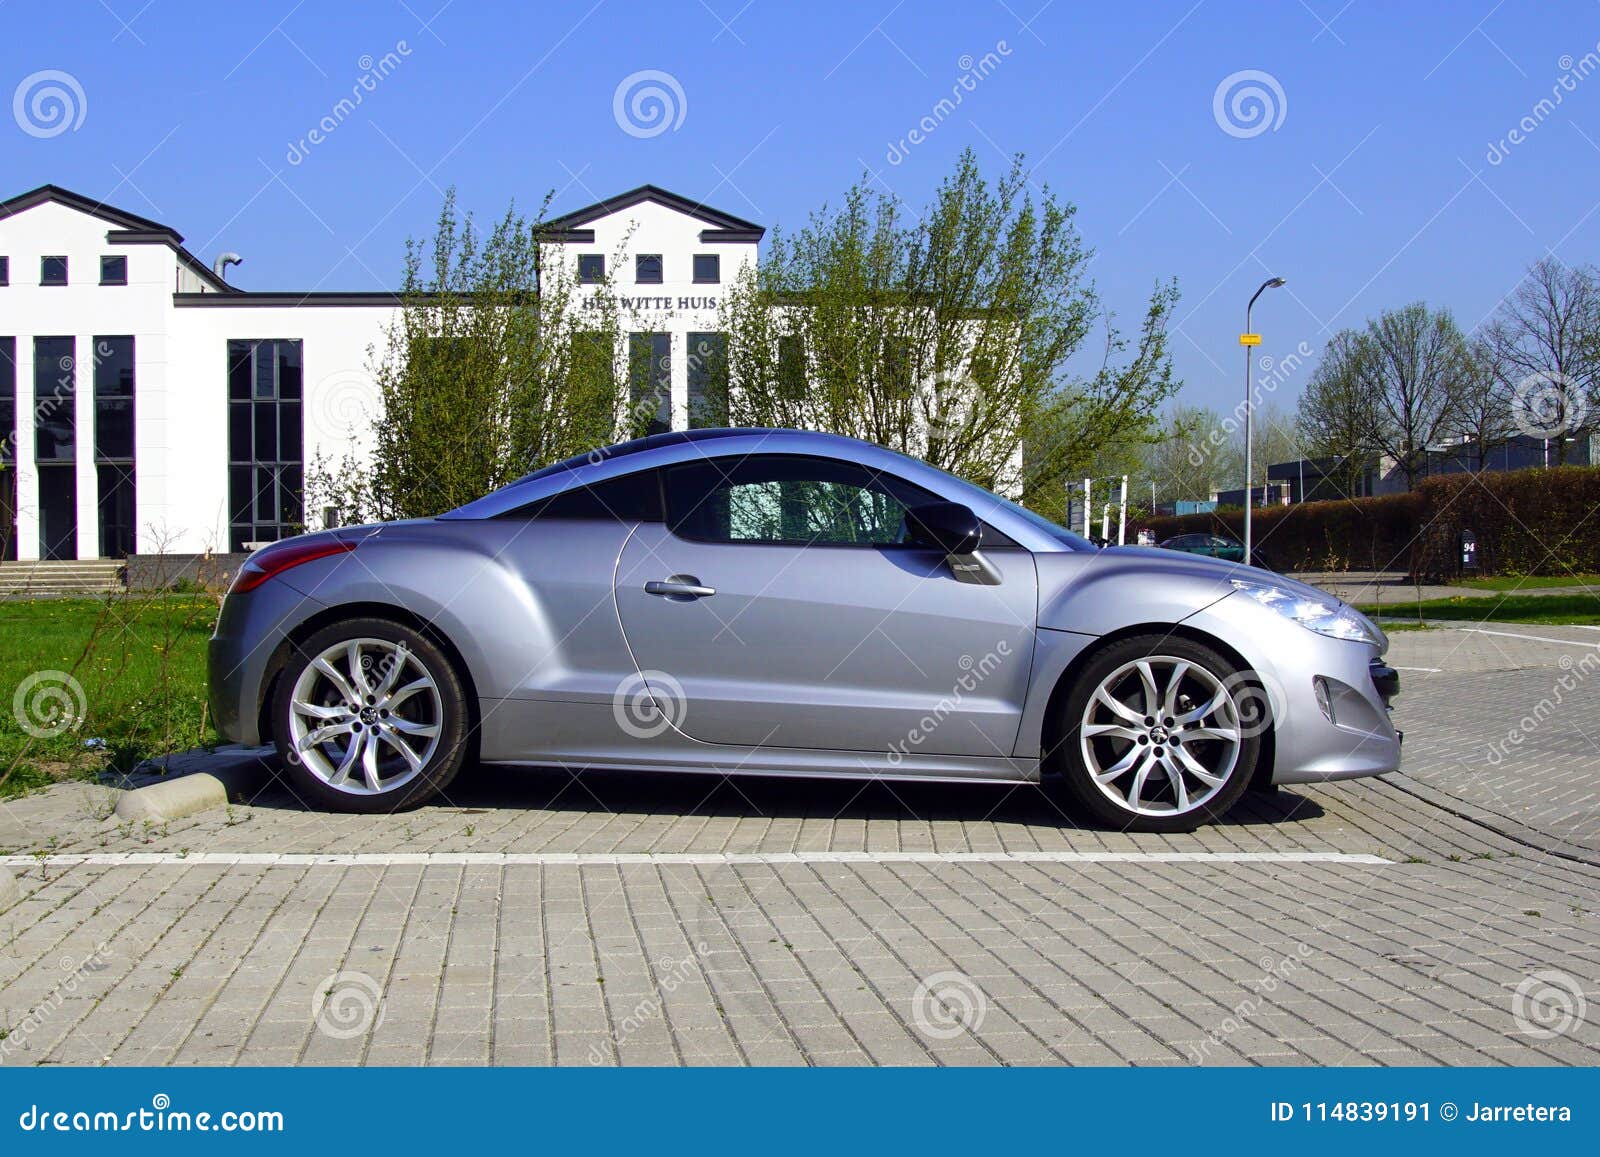 Peugeot rcz coupe modern design sport car parked In city Street Stock Photo